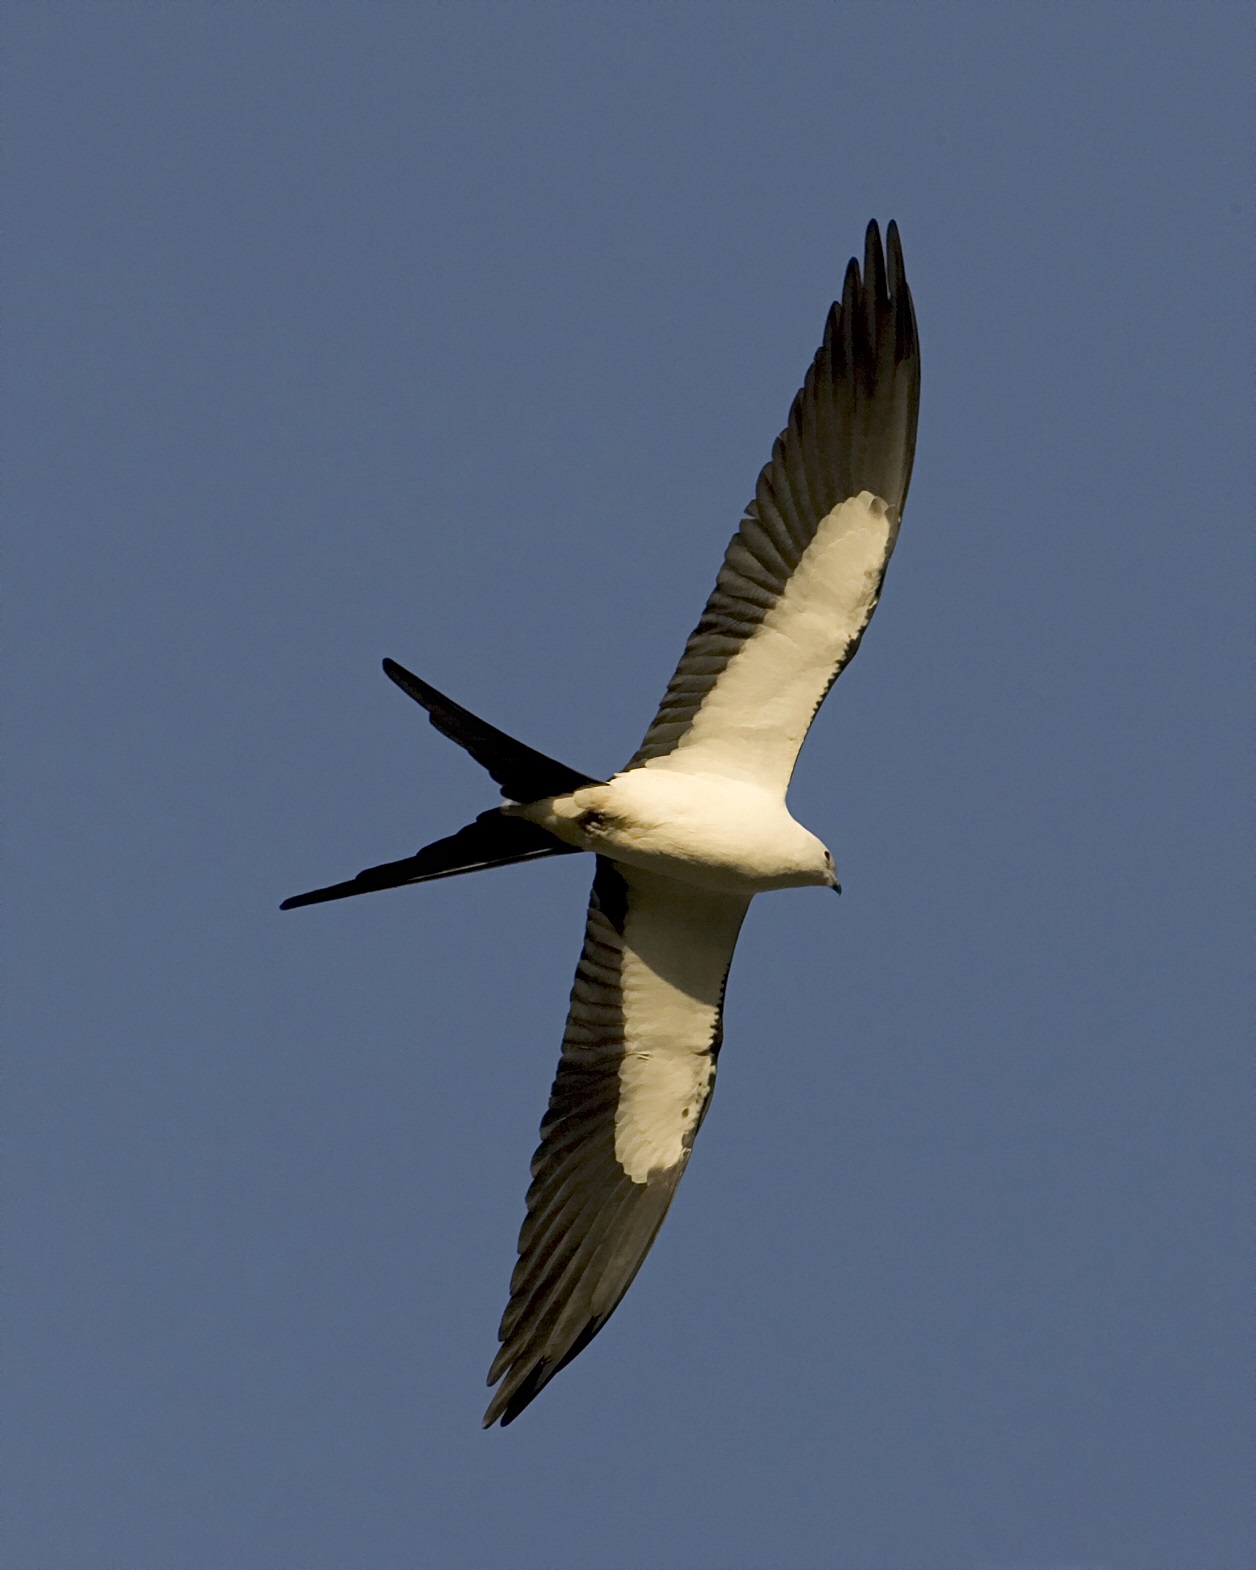 Sky Fliers The Swallow Tailed Kite Ufifas Extension Pinellas County